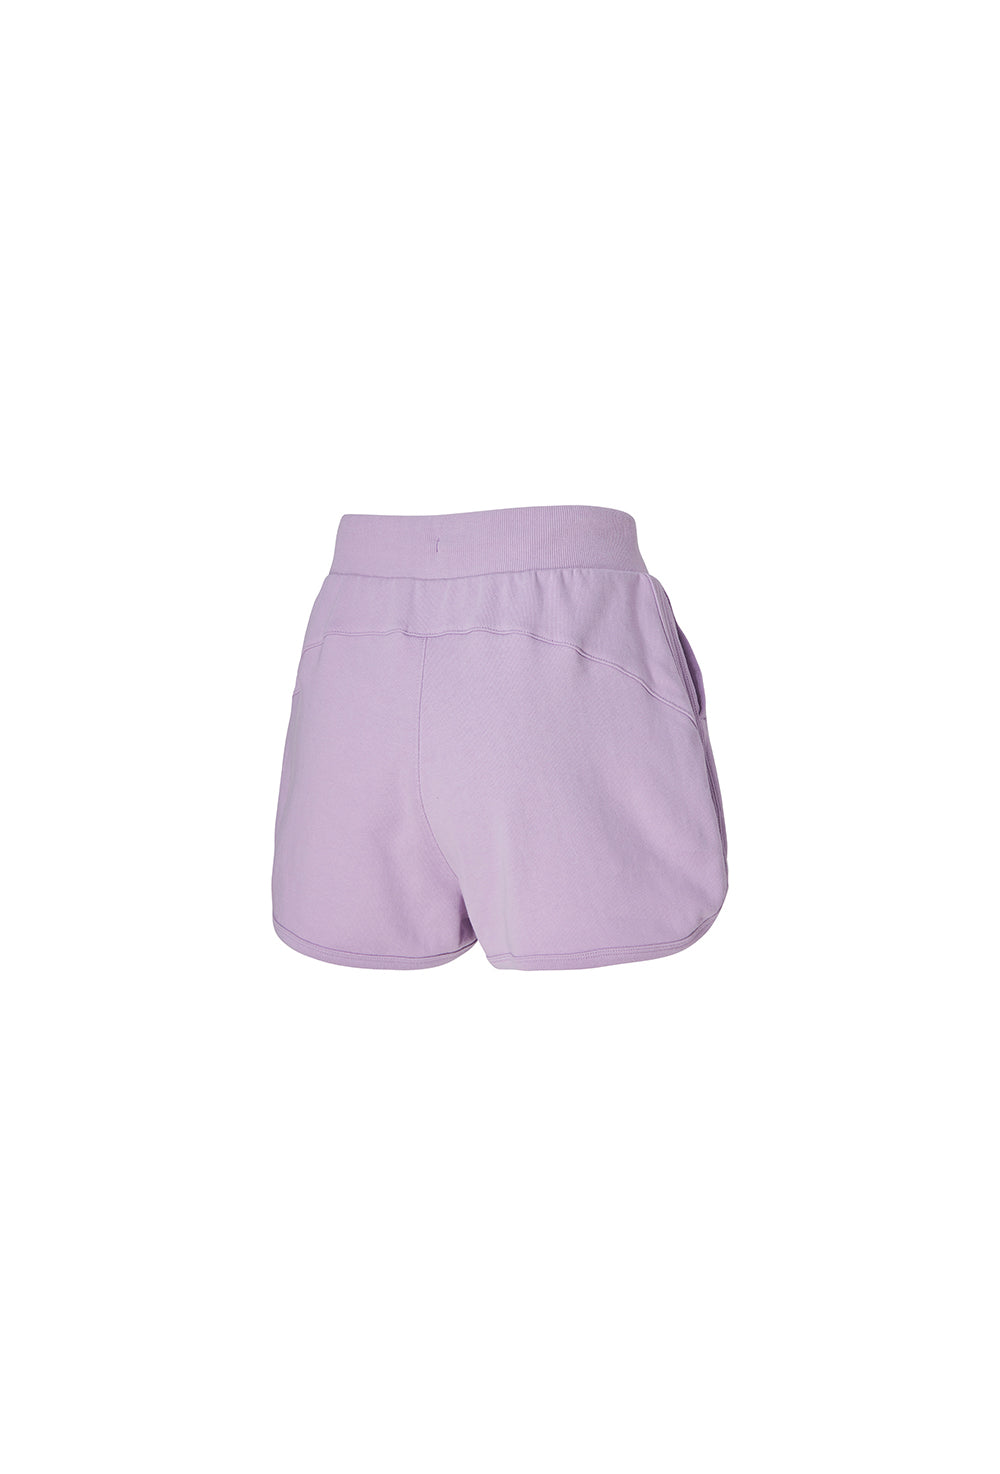 XXMX Daily Cotton Shorts - Crystal Lavender